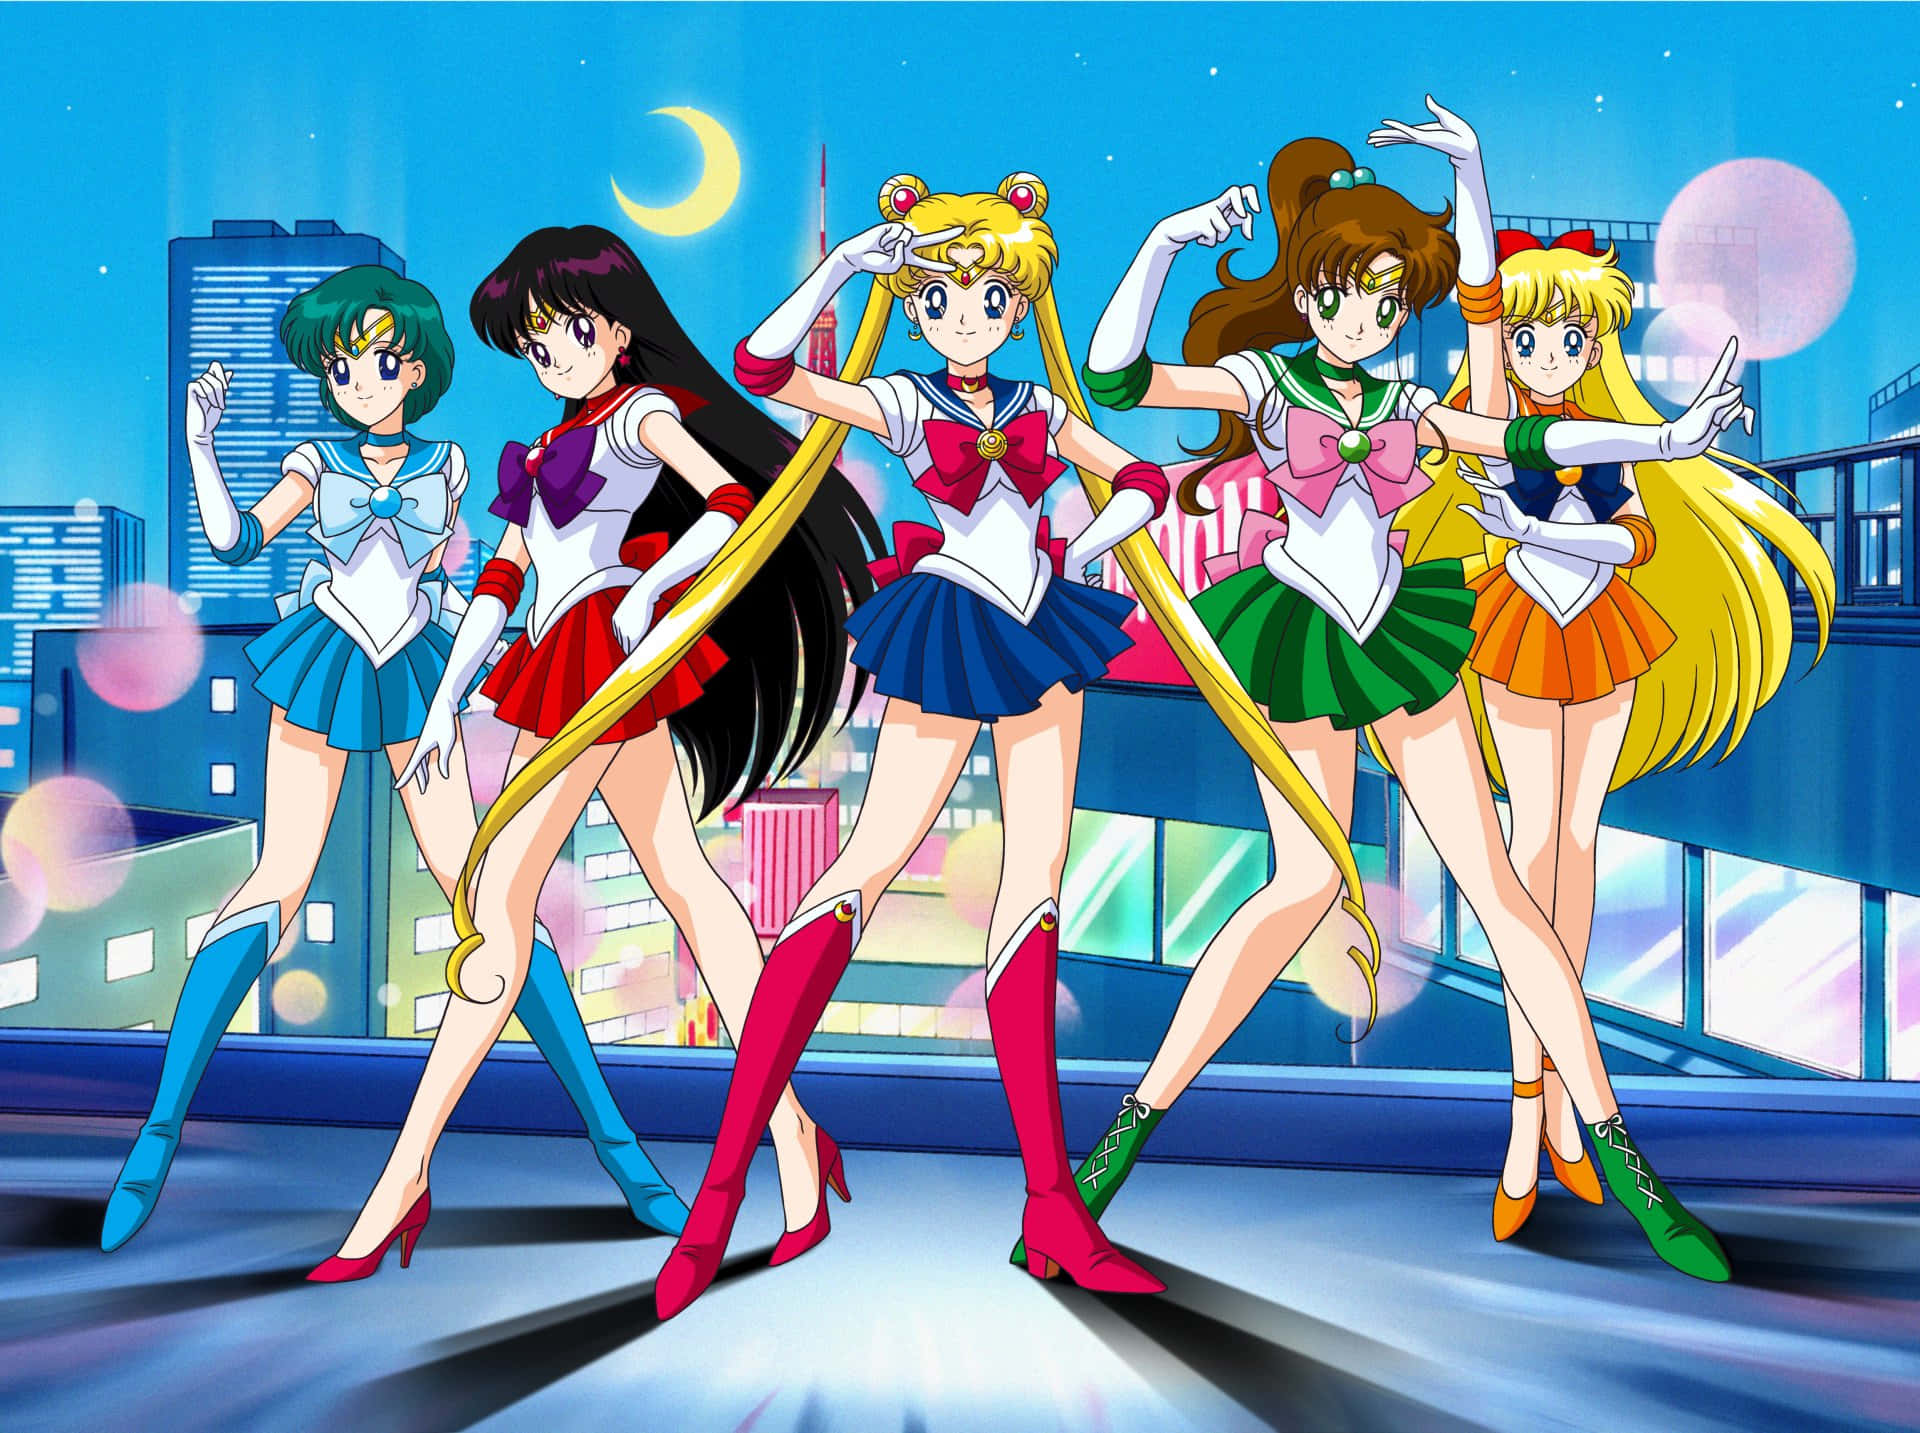 "A representation of one of Japan's most iconic superheroes: Sailor Moon"